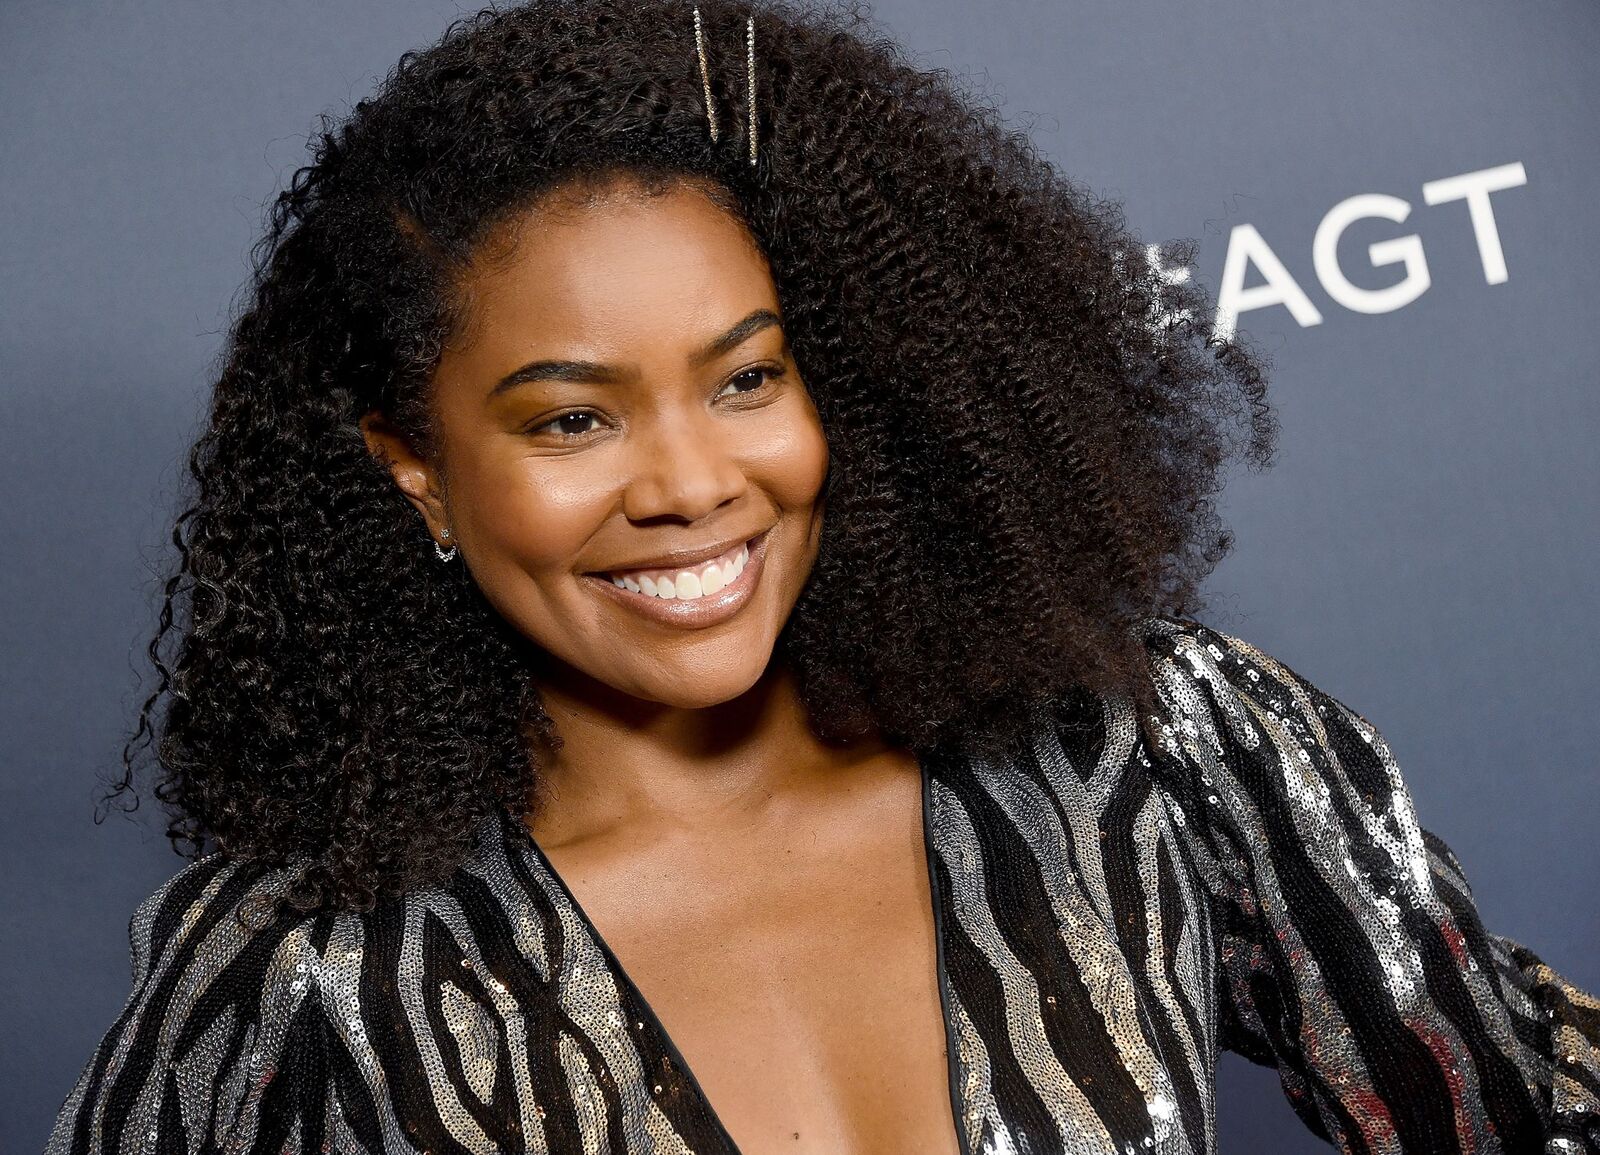  Gabrielle Union arrives at "America's Got Talent" Season 14 Live Show Red Carpet at Dolby Theatre on September 10, 2019 | Photo: Getty IMages